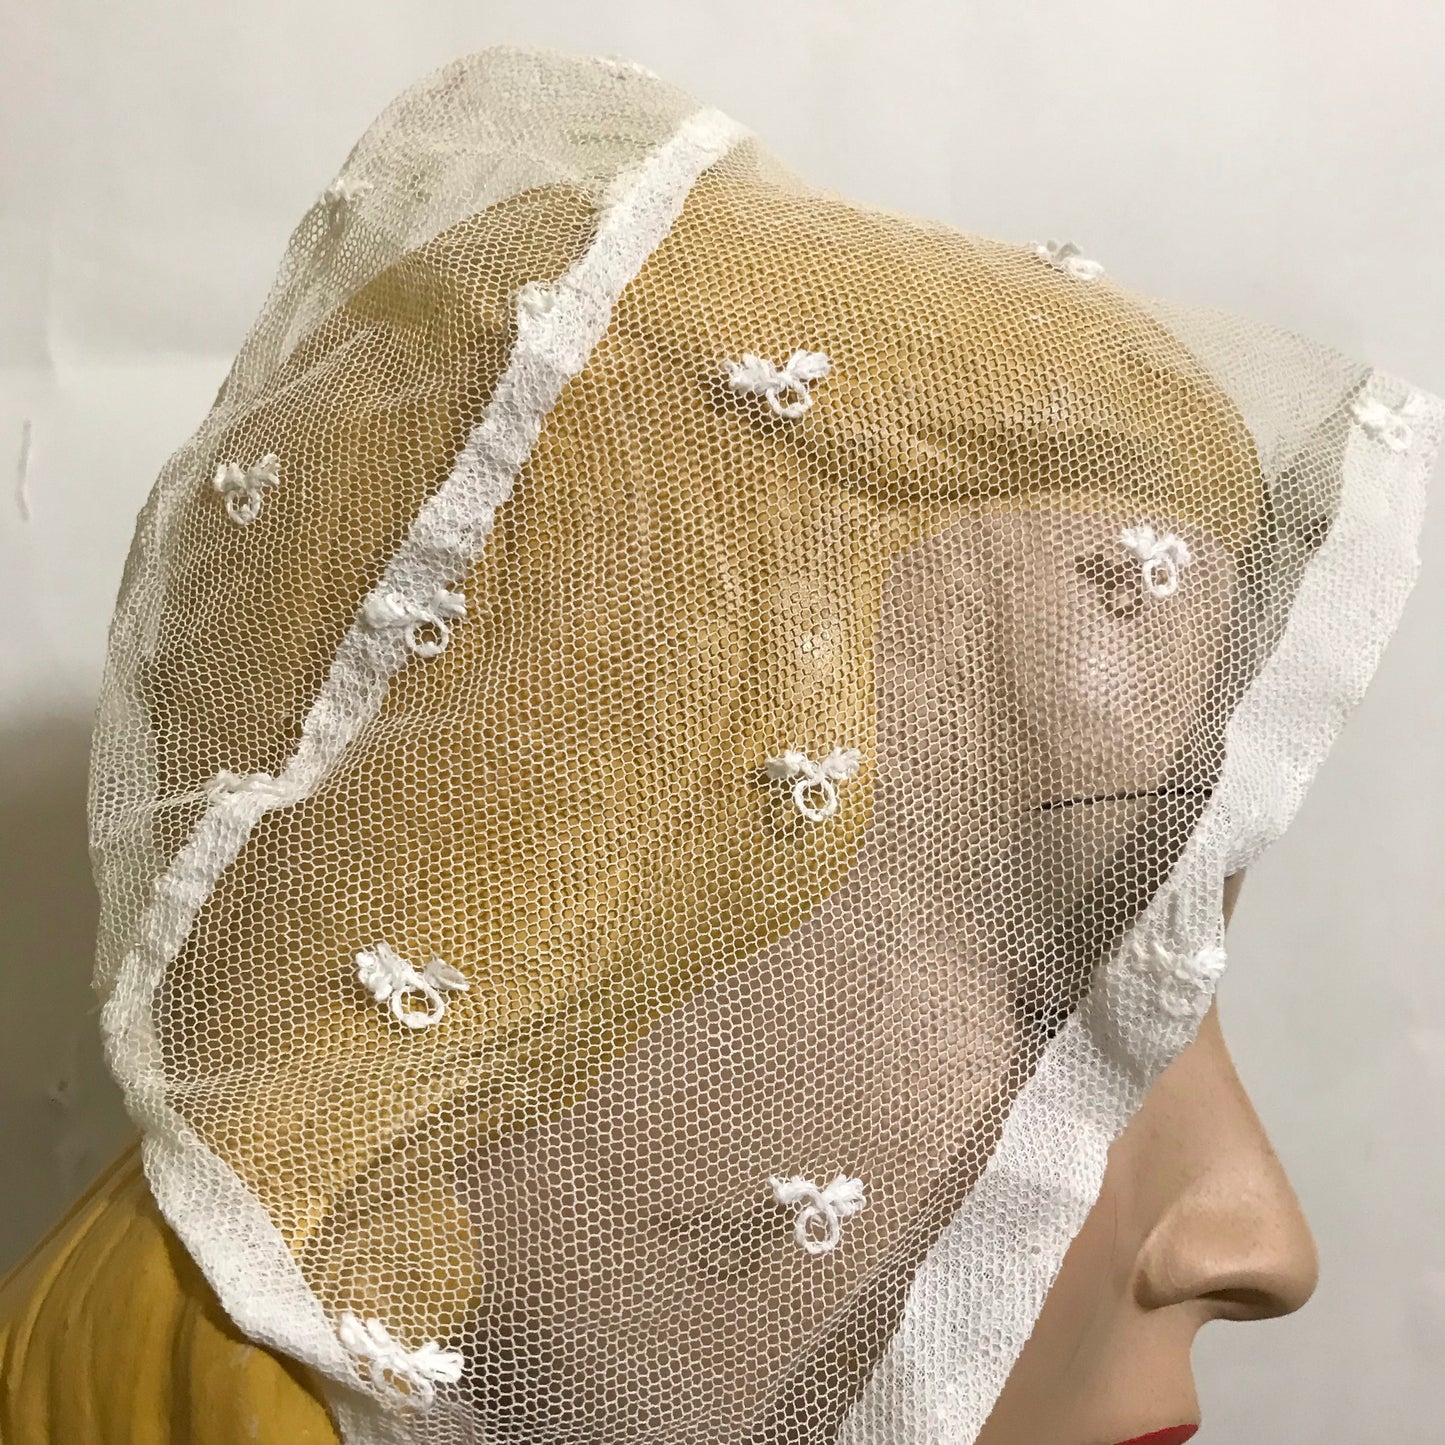 Ivory Embroidered Netting Cap Hat circa 1850